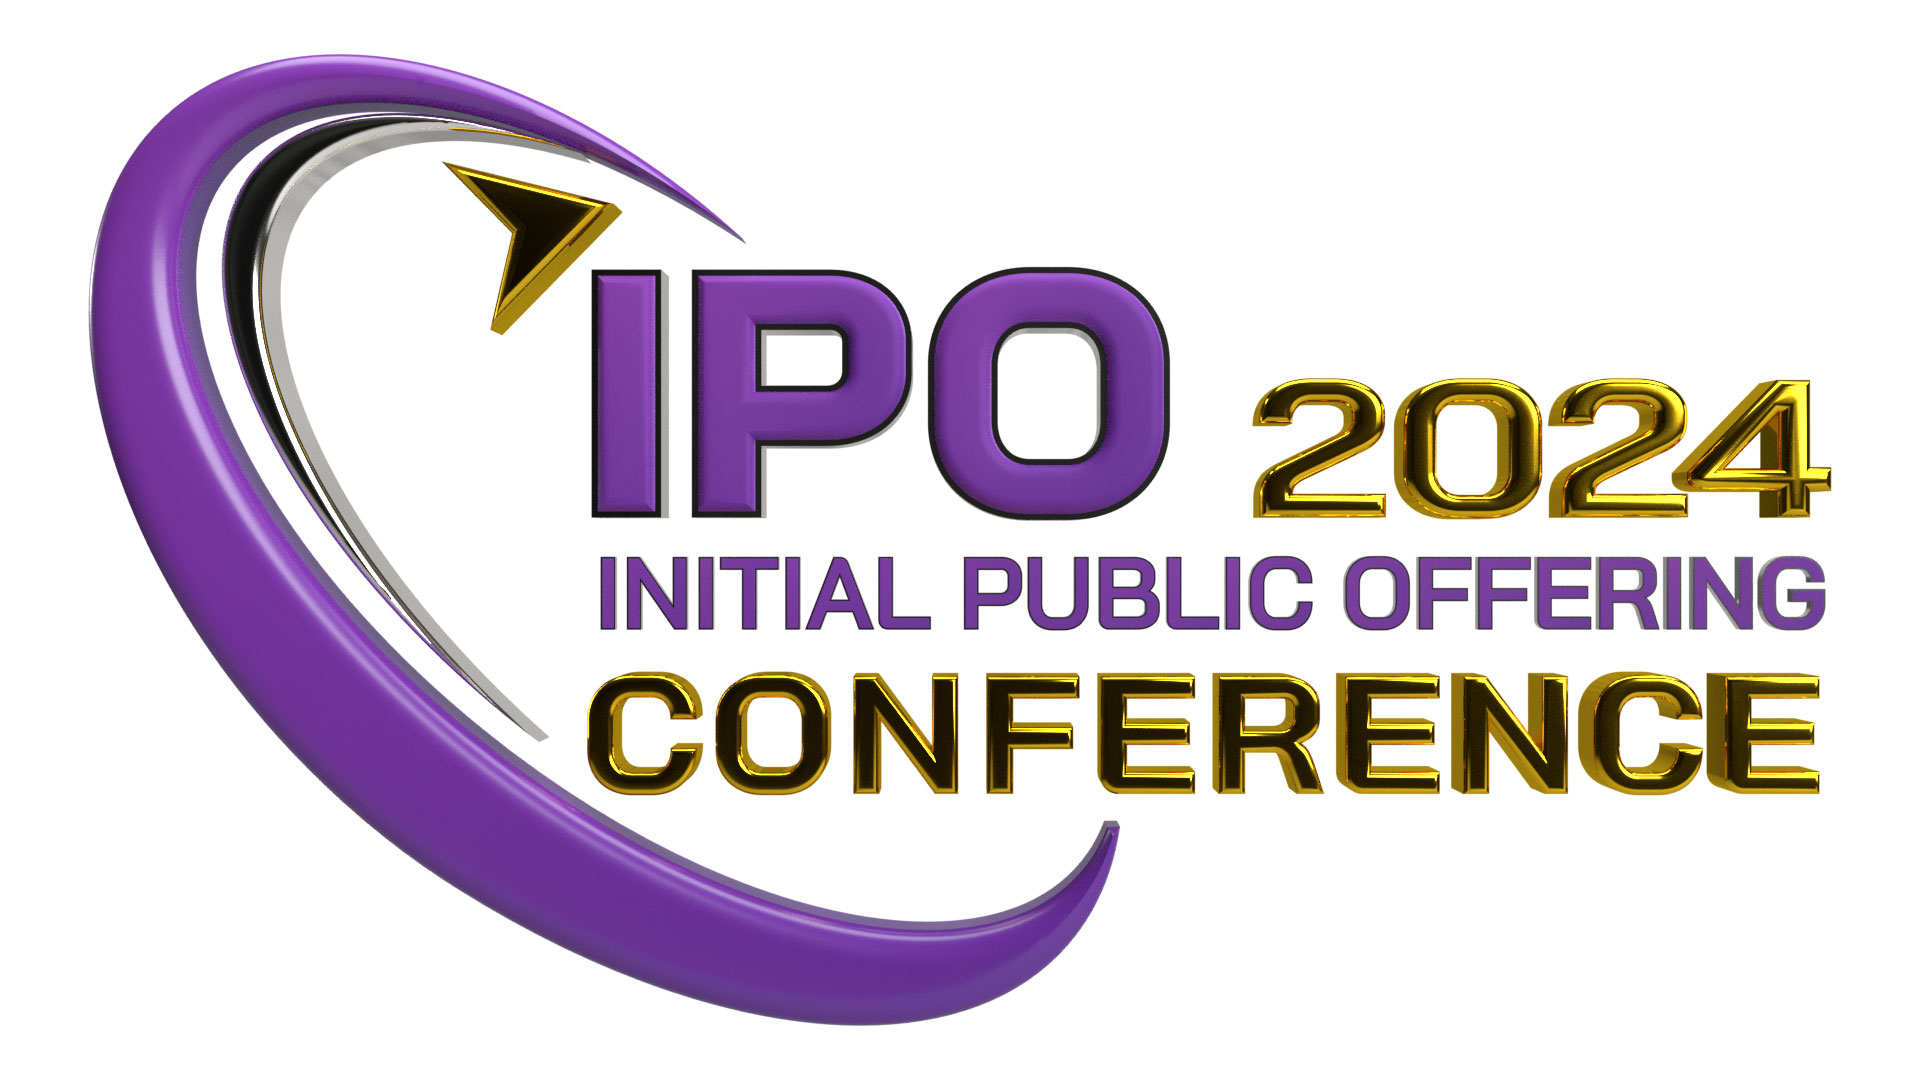 IPO Conference 2024, New York, United States of America